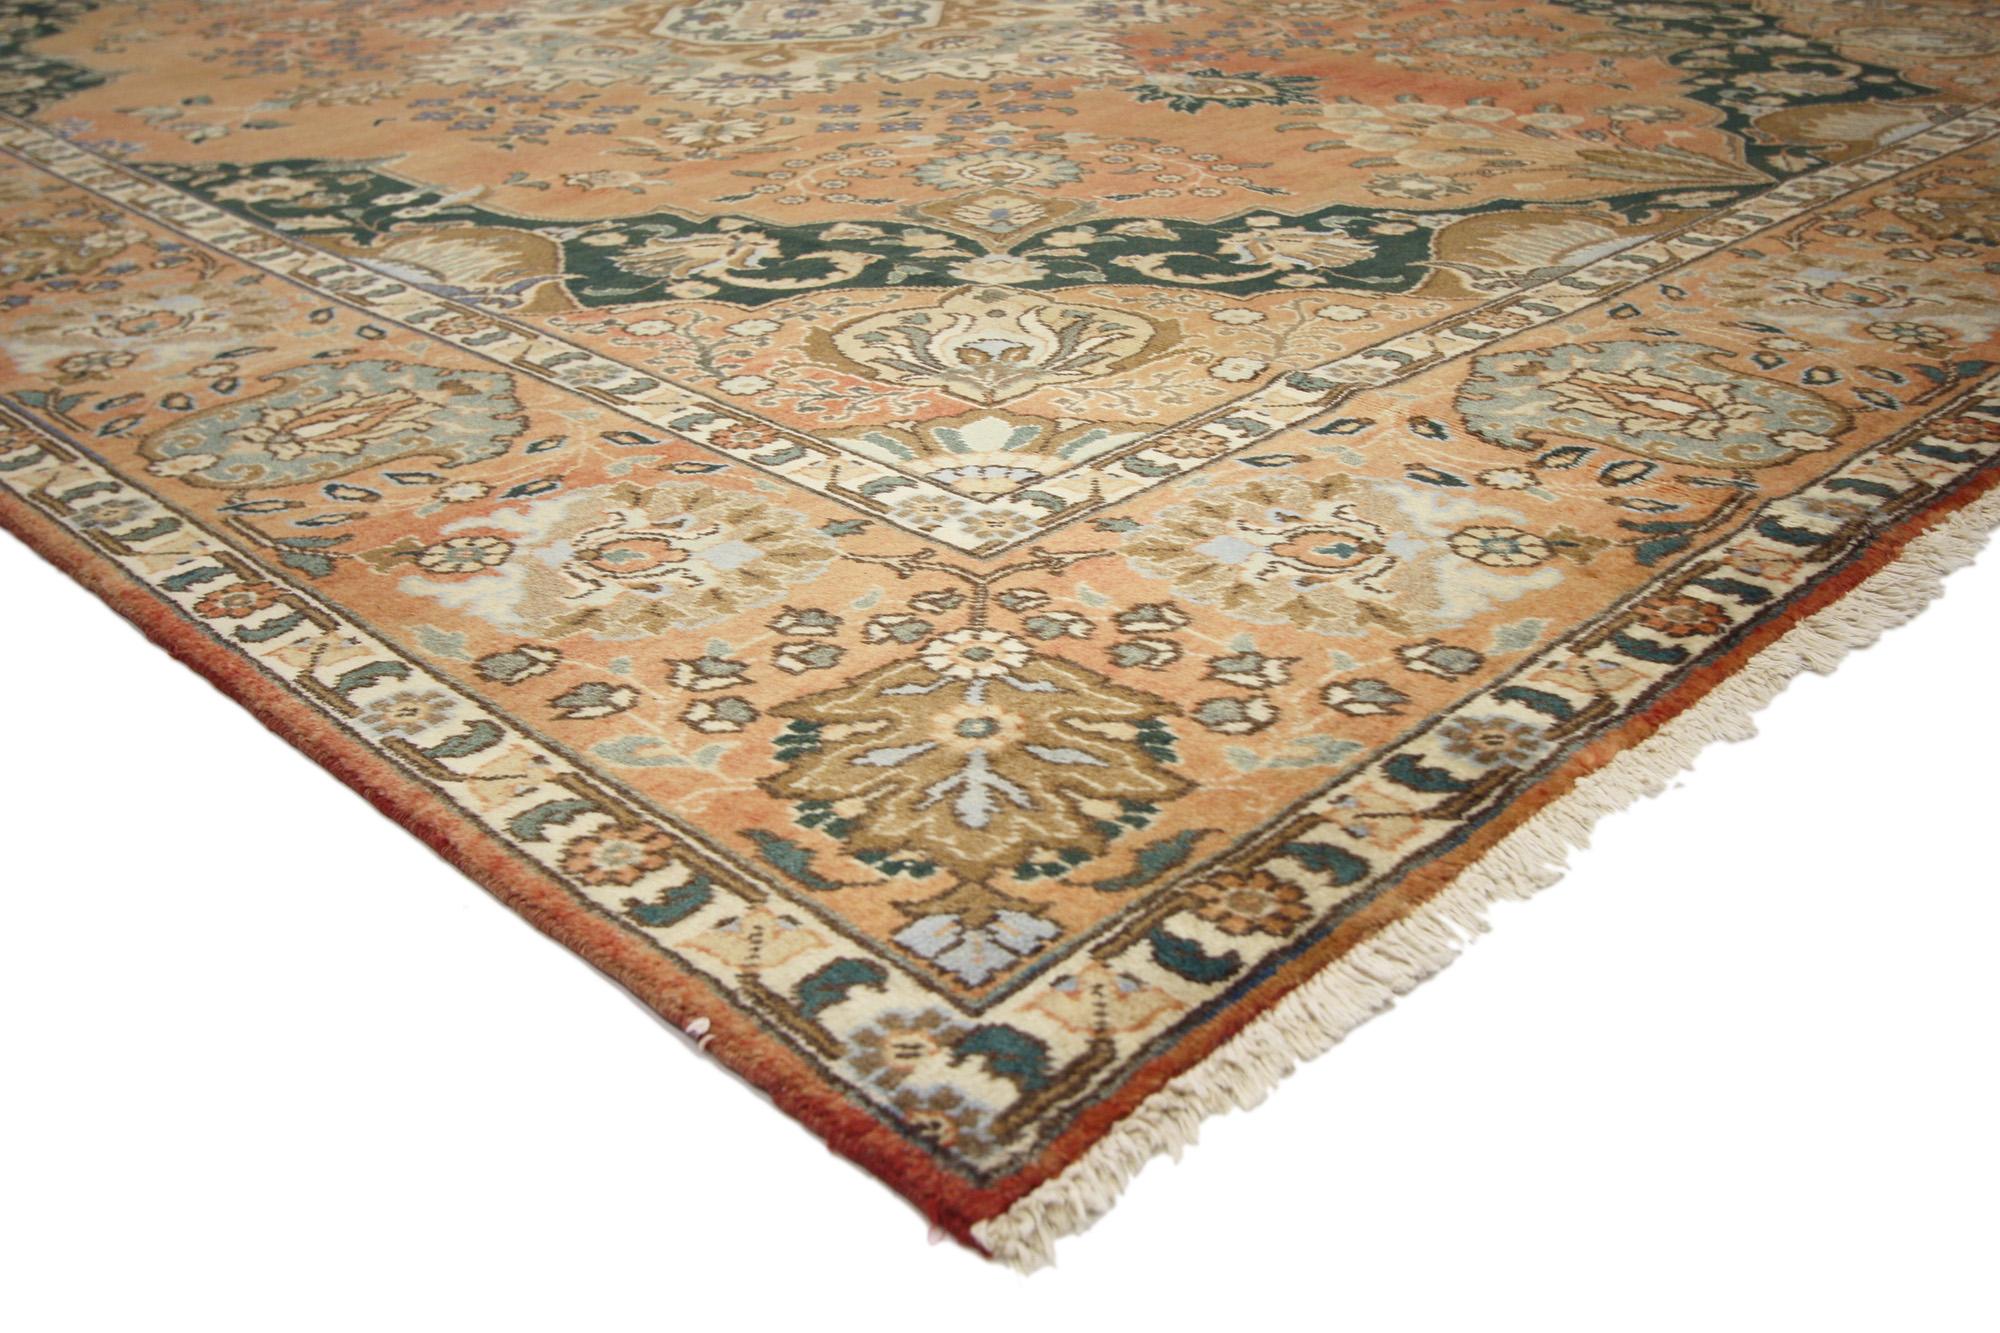 75586 Vintage Persian Tabriz Rug, 09'09 x 12'05. Balancing a timeless design with a romantic rustic sensibility, this hand knotted wool distressed vintage Persian Tabriz rug beautifully embodies English Chintz Rustic style. A cartouche medallion